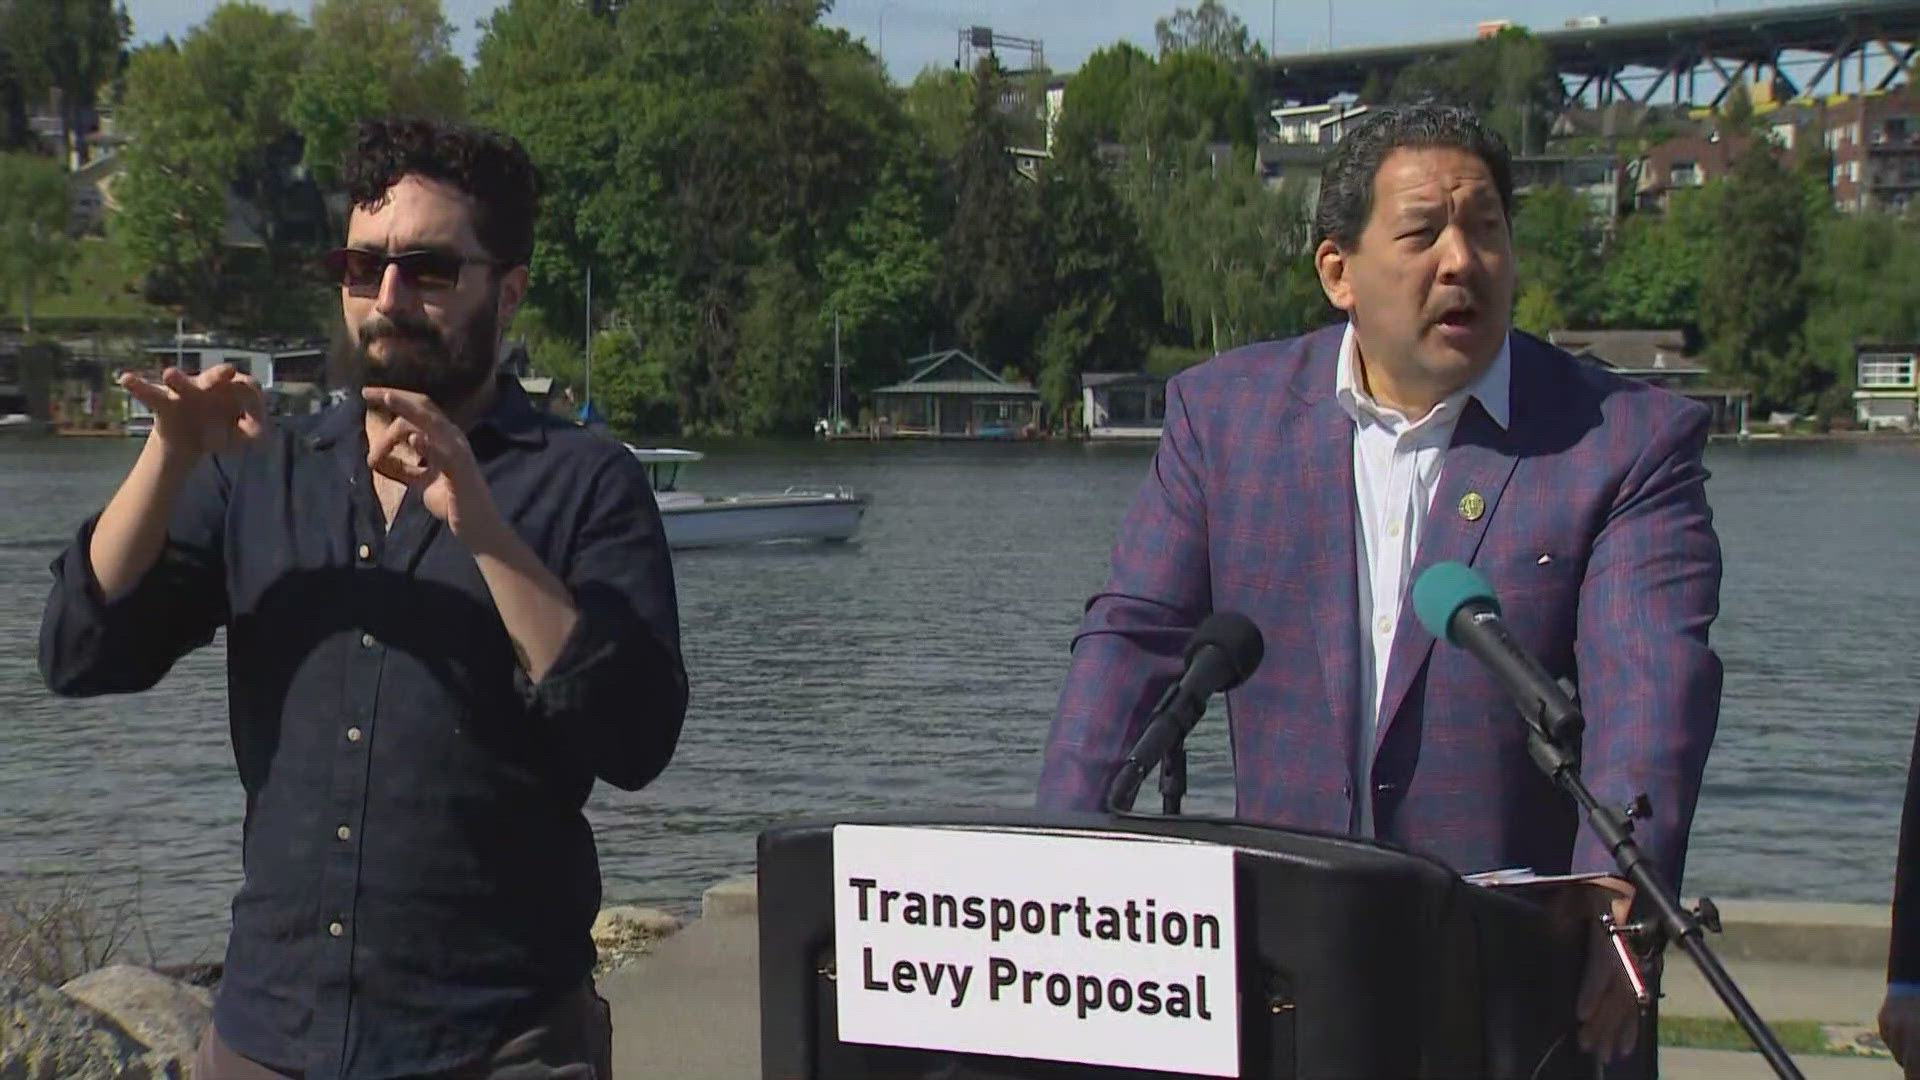 The levy is a $1.45 billion dollar investment in bridges, street safety, transport hub connections, side walks and bike lanes